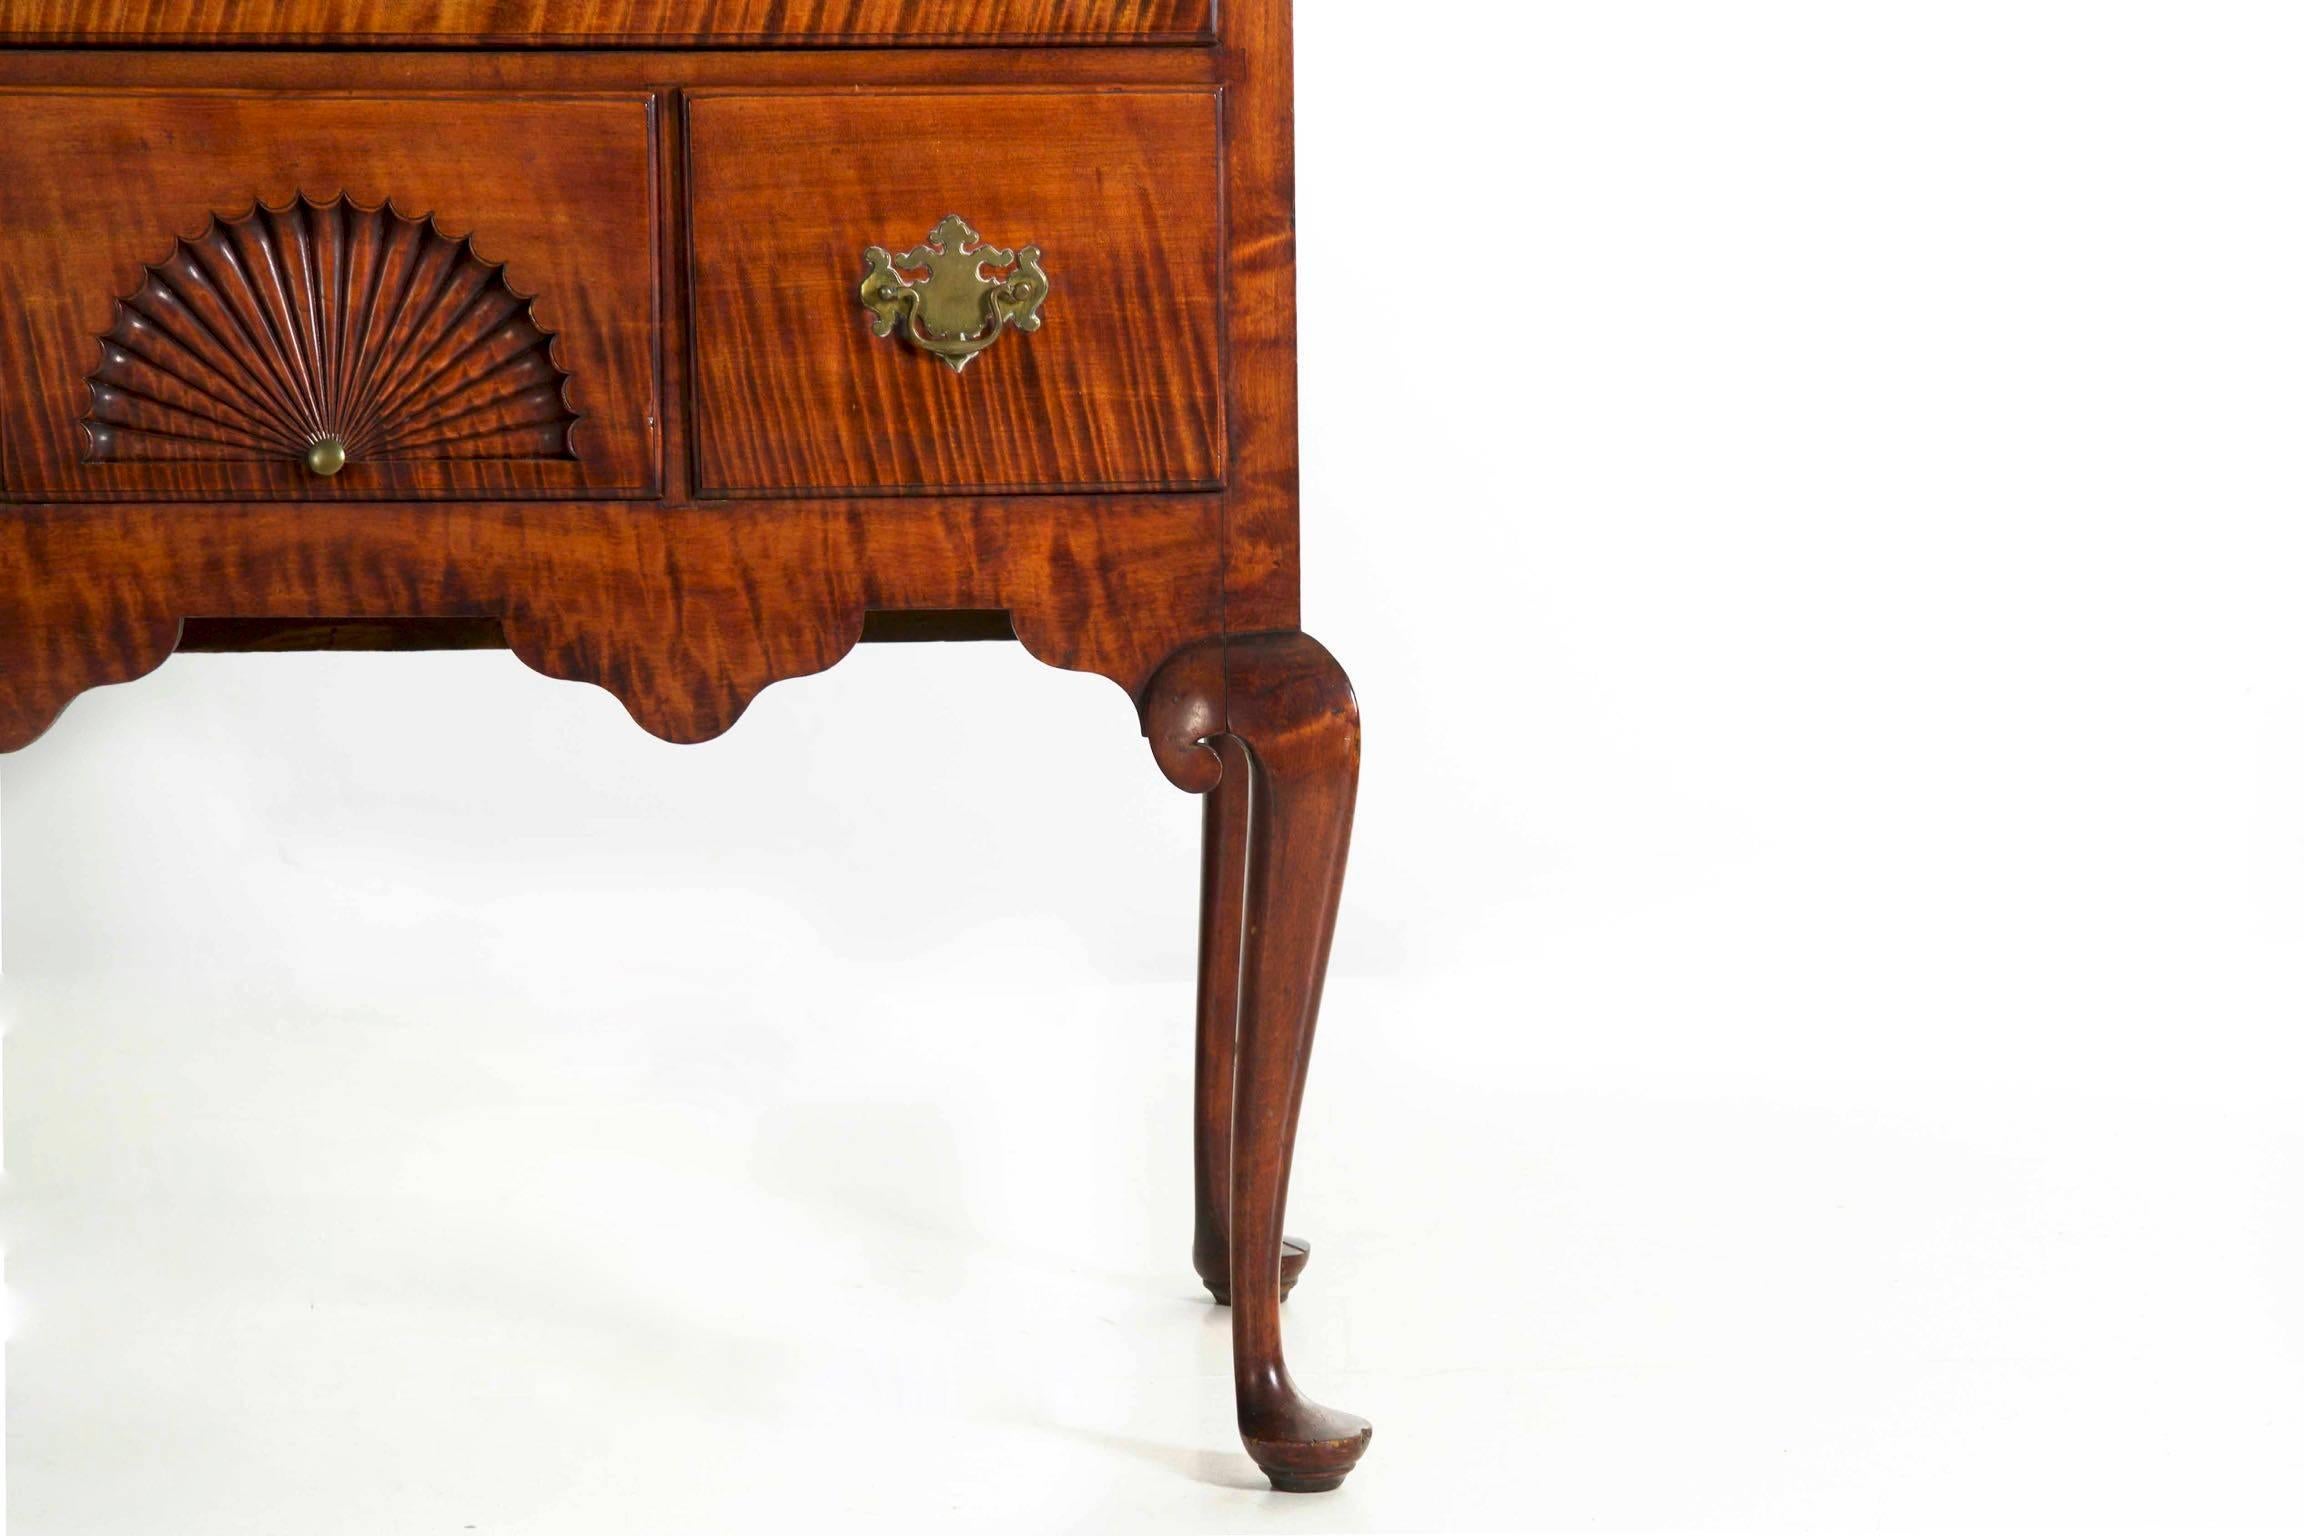 Brass Superb American Queen Anne Curly Maple Highboy Chest of Drawers, circa 1760-1780